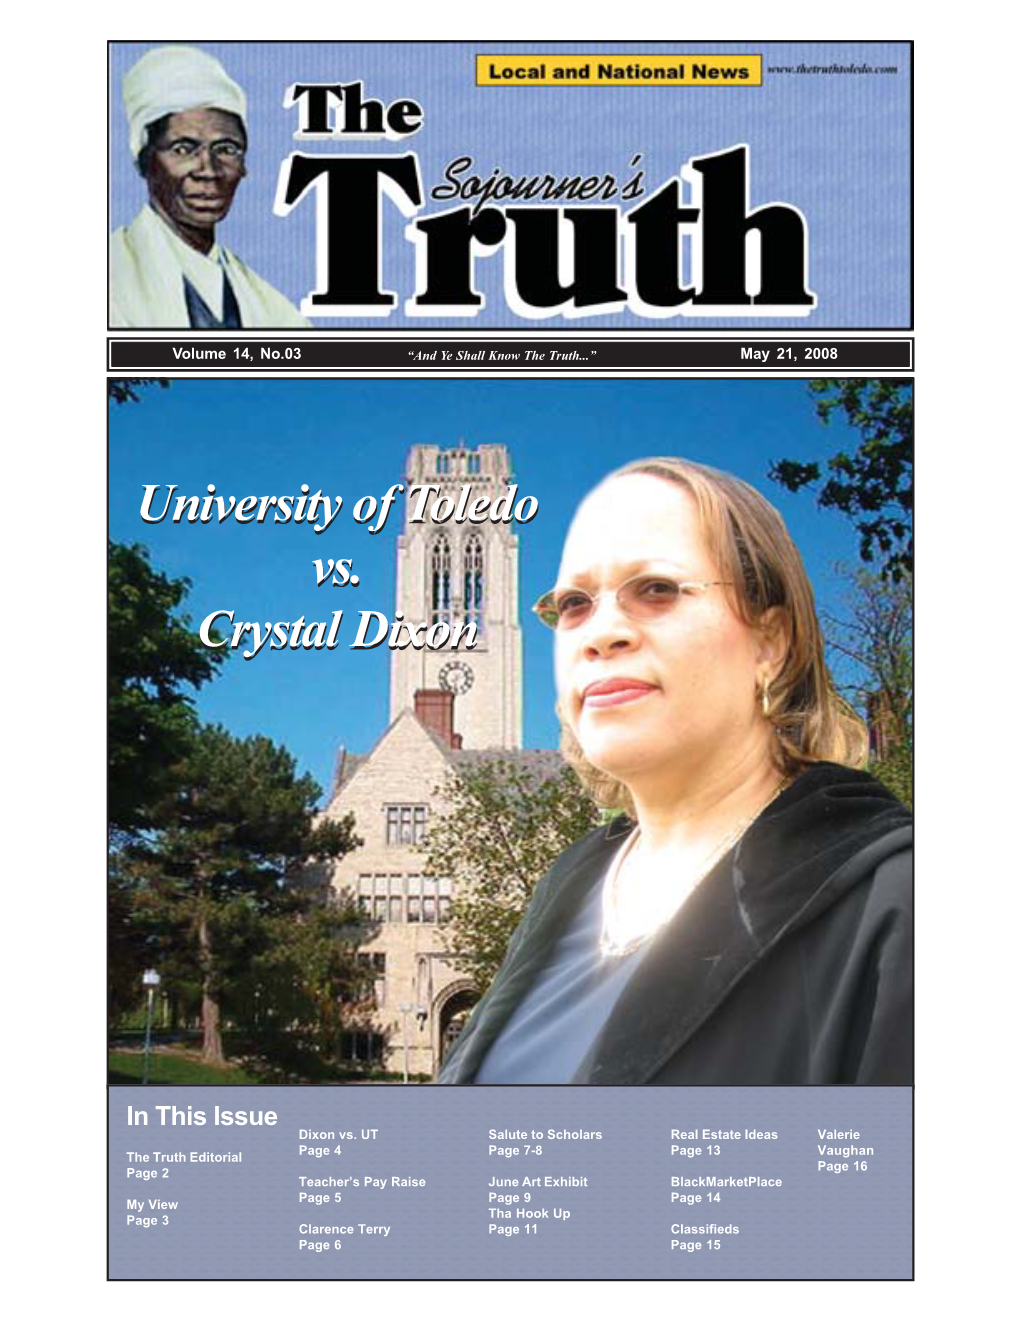 Crystal Dixon Vs. the University of Toledo by Alexis Randles Sojourner’S Truth Reporter